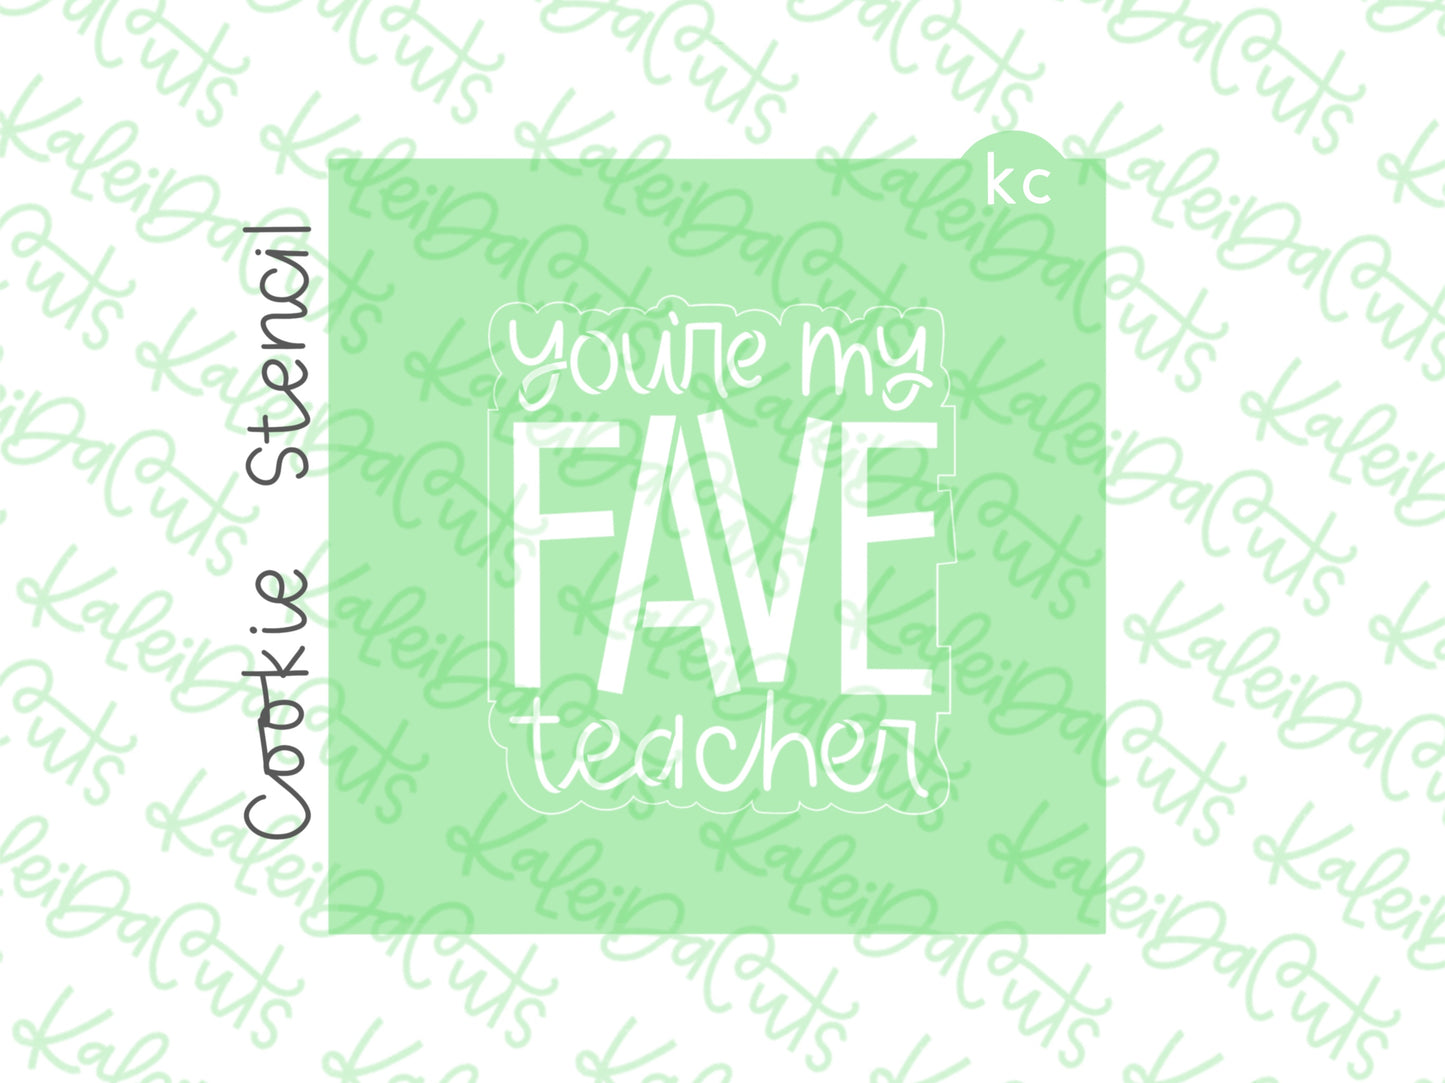 You Are My Fave Teacher Stencil